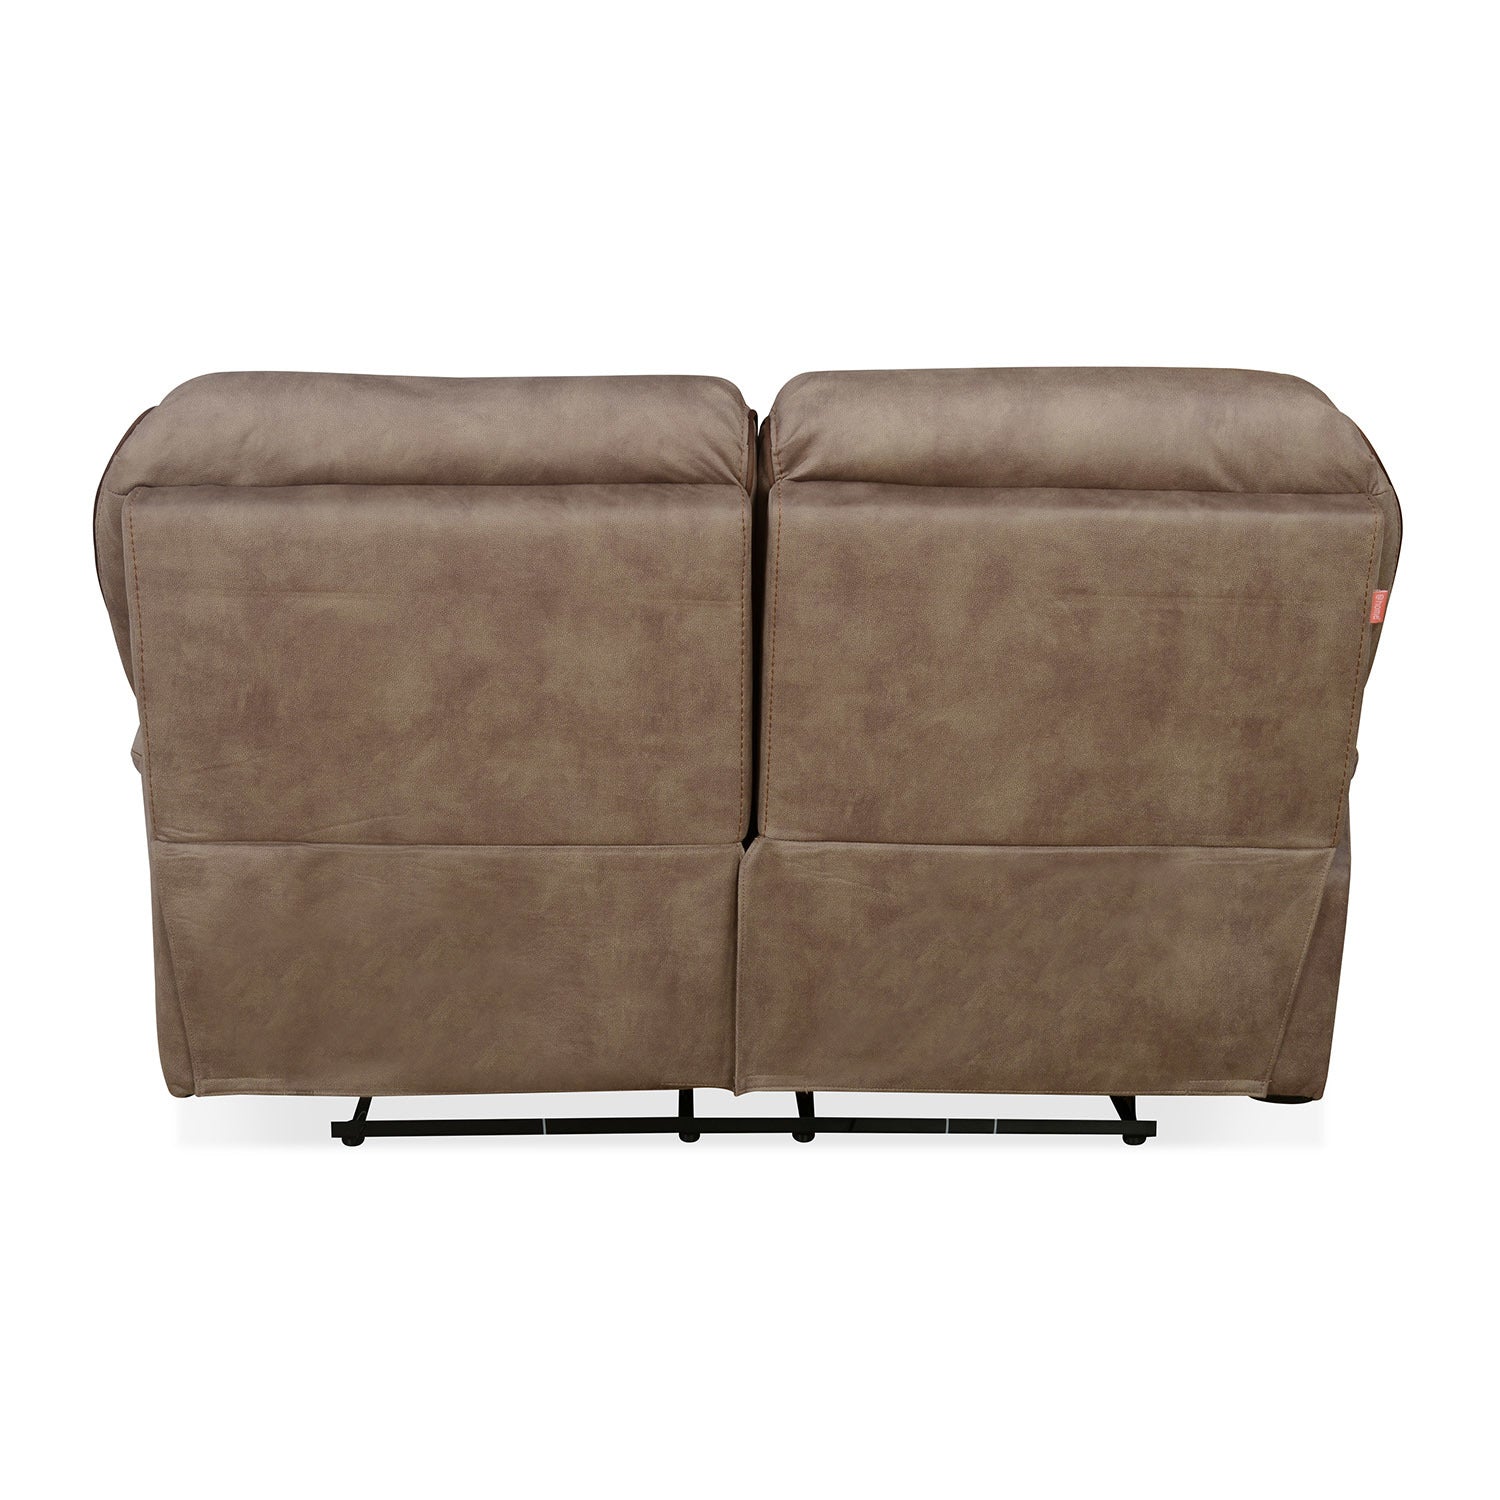 Fuzzy 2 Seater Sofa with 2 Electric Recliner (Mocha Brown)